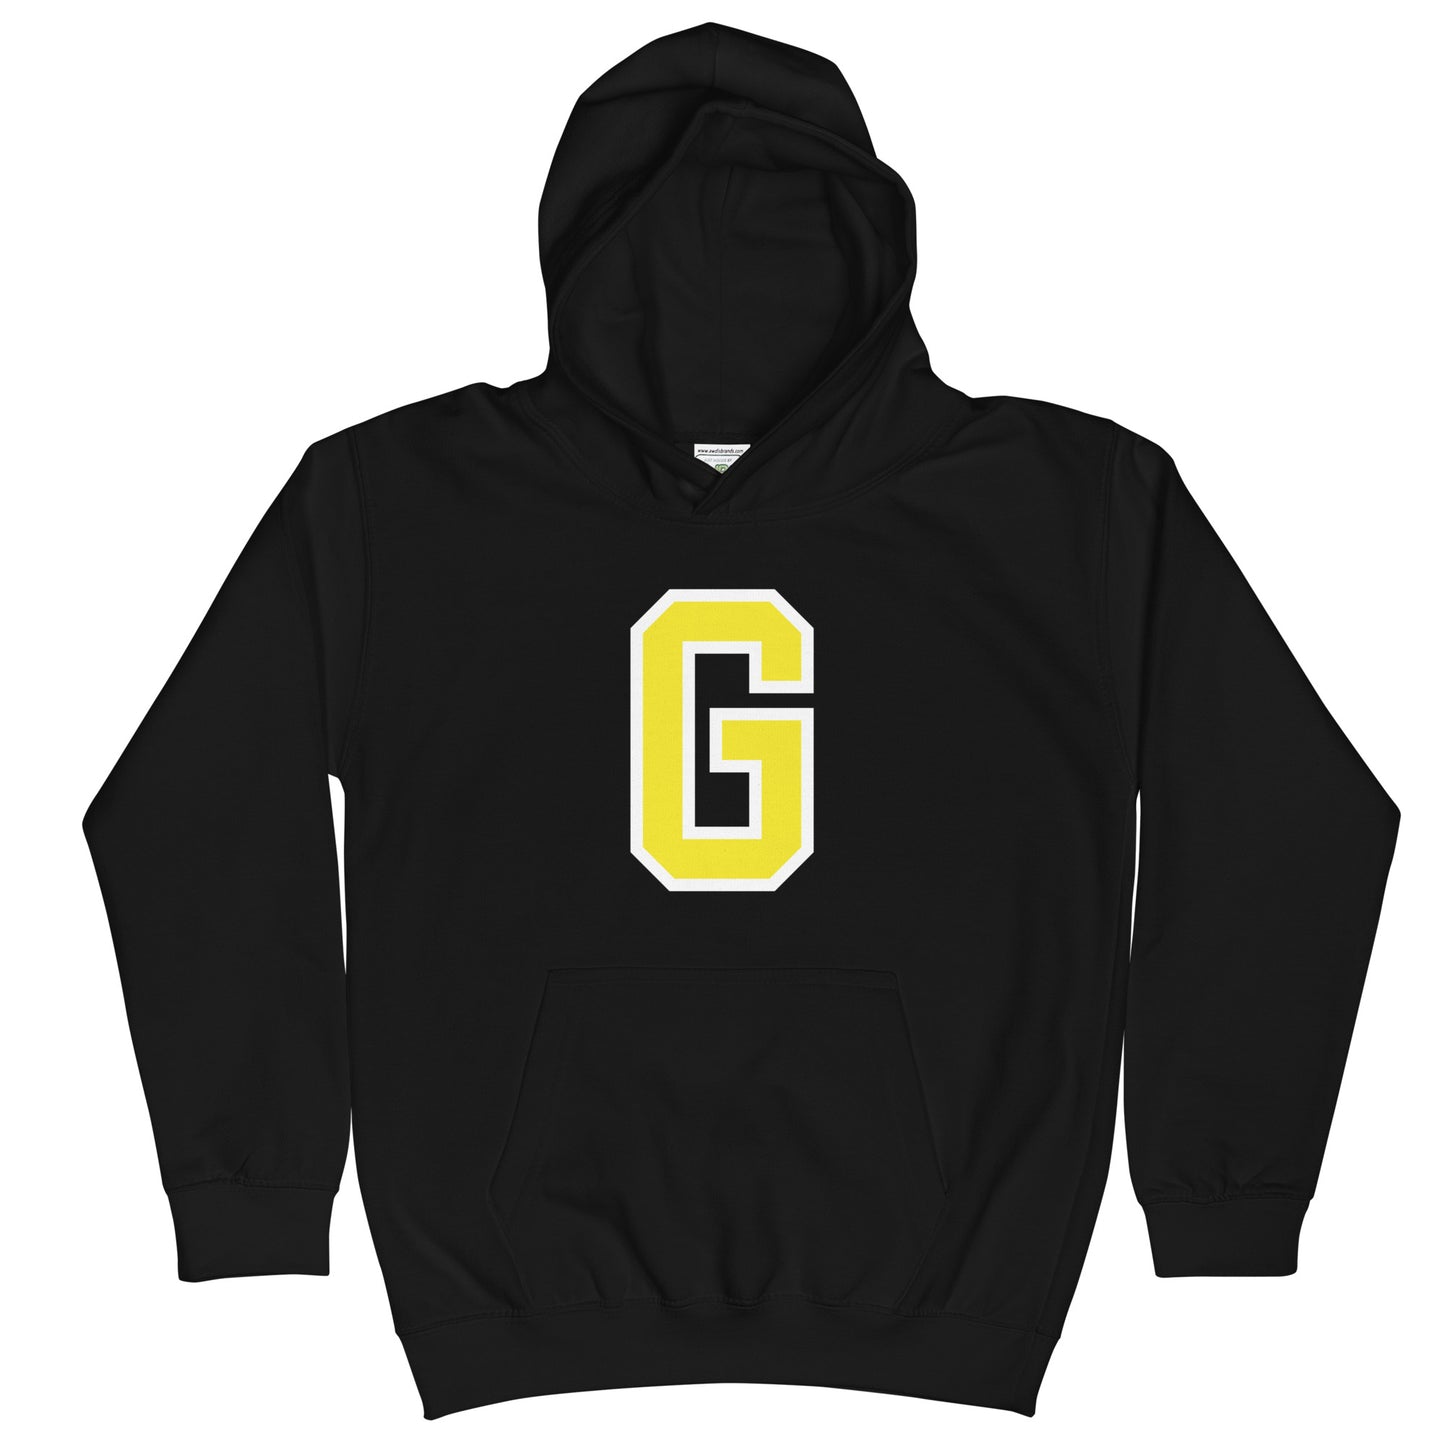 G - Sustainably Made Kids Hoodie